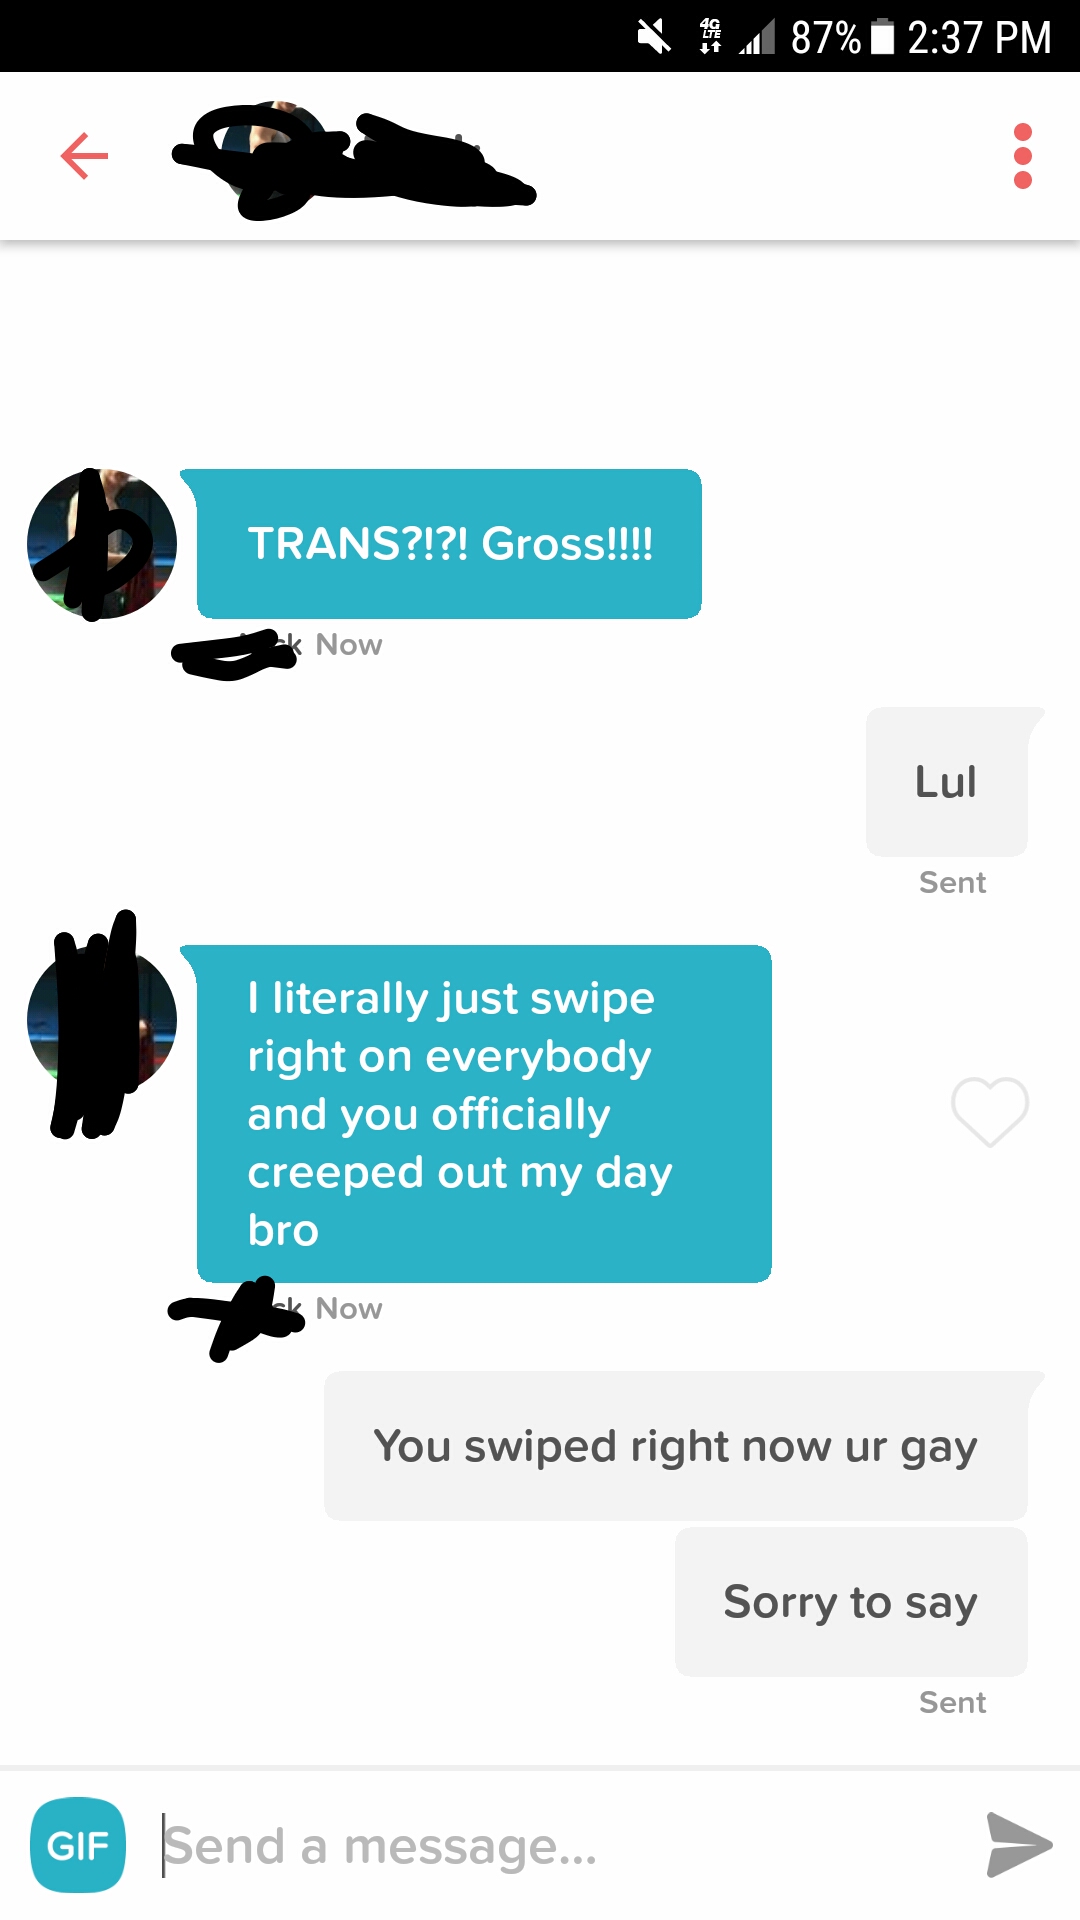 abigail tinder - 87% Trans?!?! Gross!!!! Now Lul Sent I literally just swipe right on everybody and you officially creeped out my day bro k Now You swiped right now ur gay Sorry to say Sent Gif | Send a message...